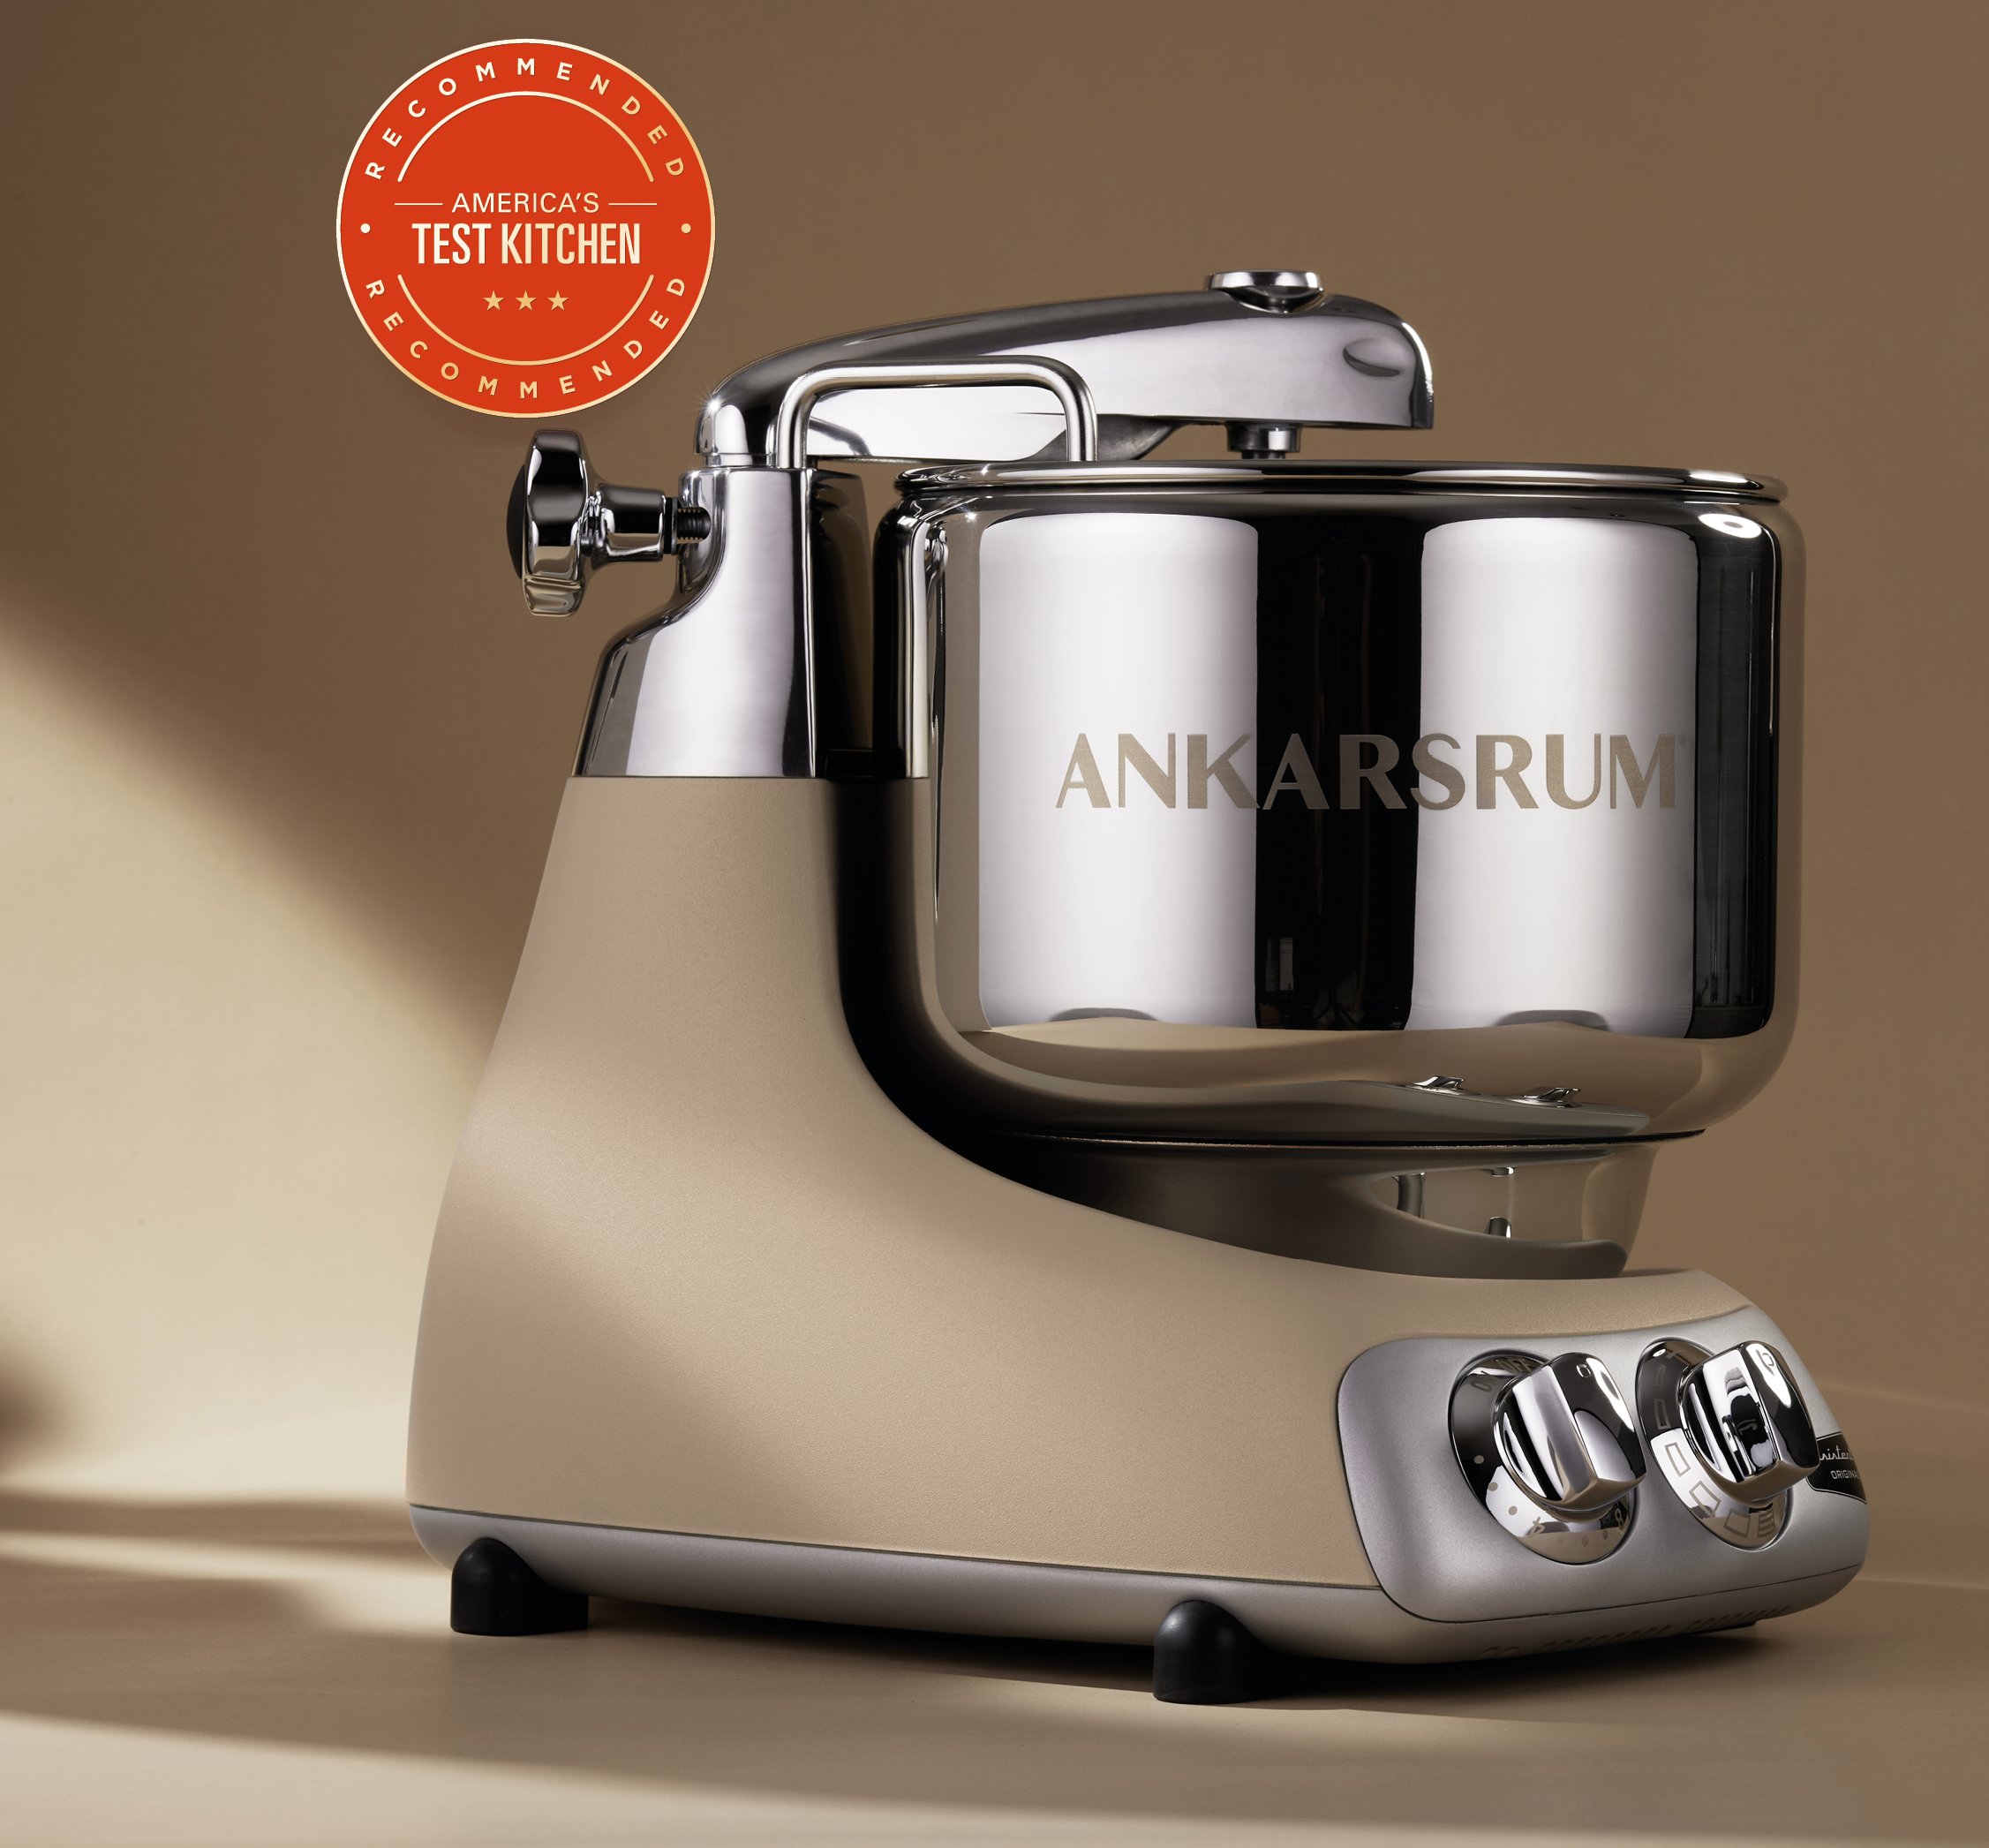 5 Reasons to Invest in an Ankarsrum Assistent– Shop in the Kitchen